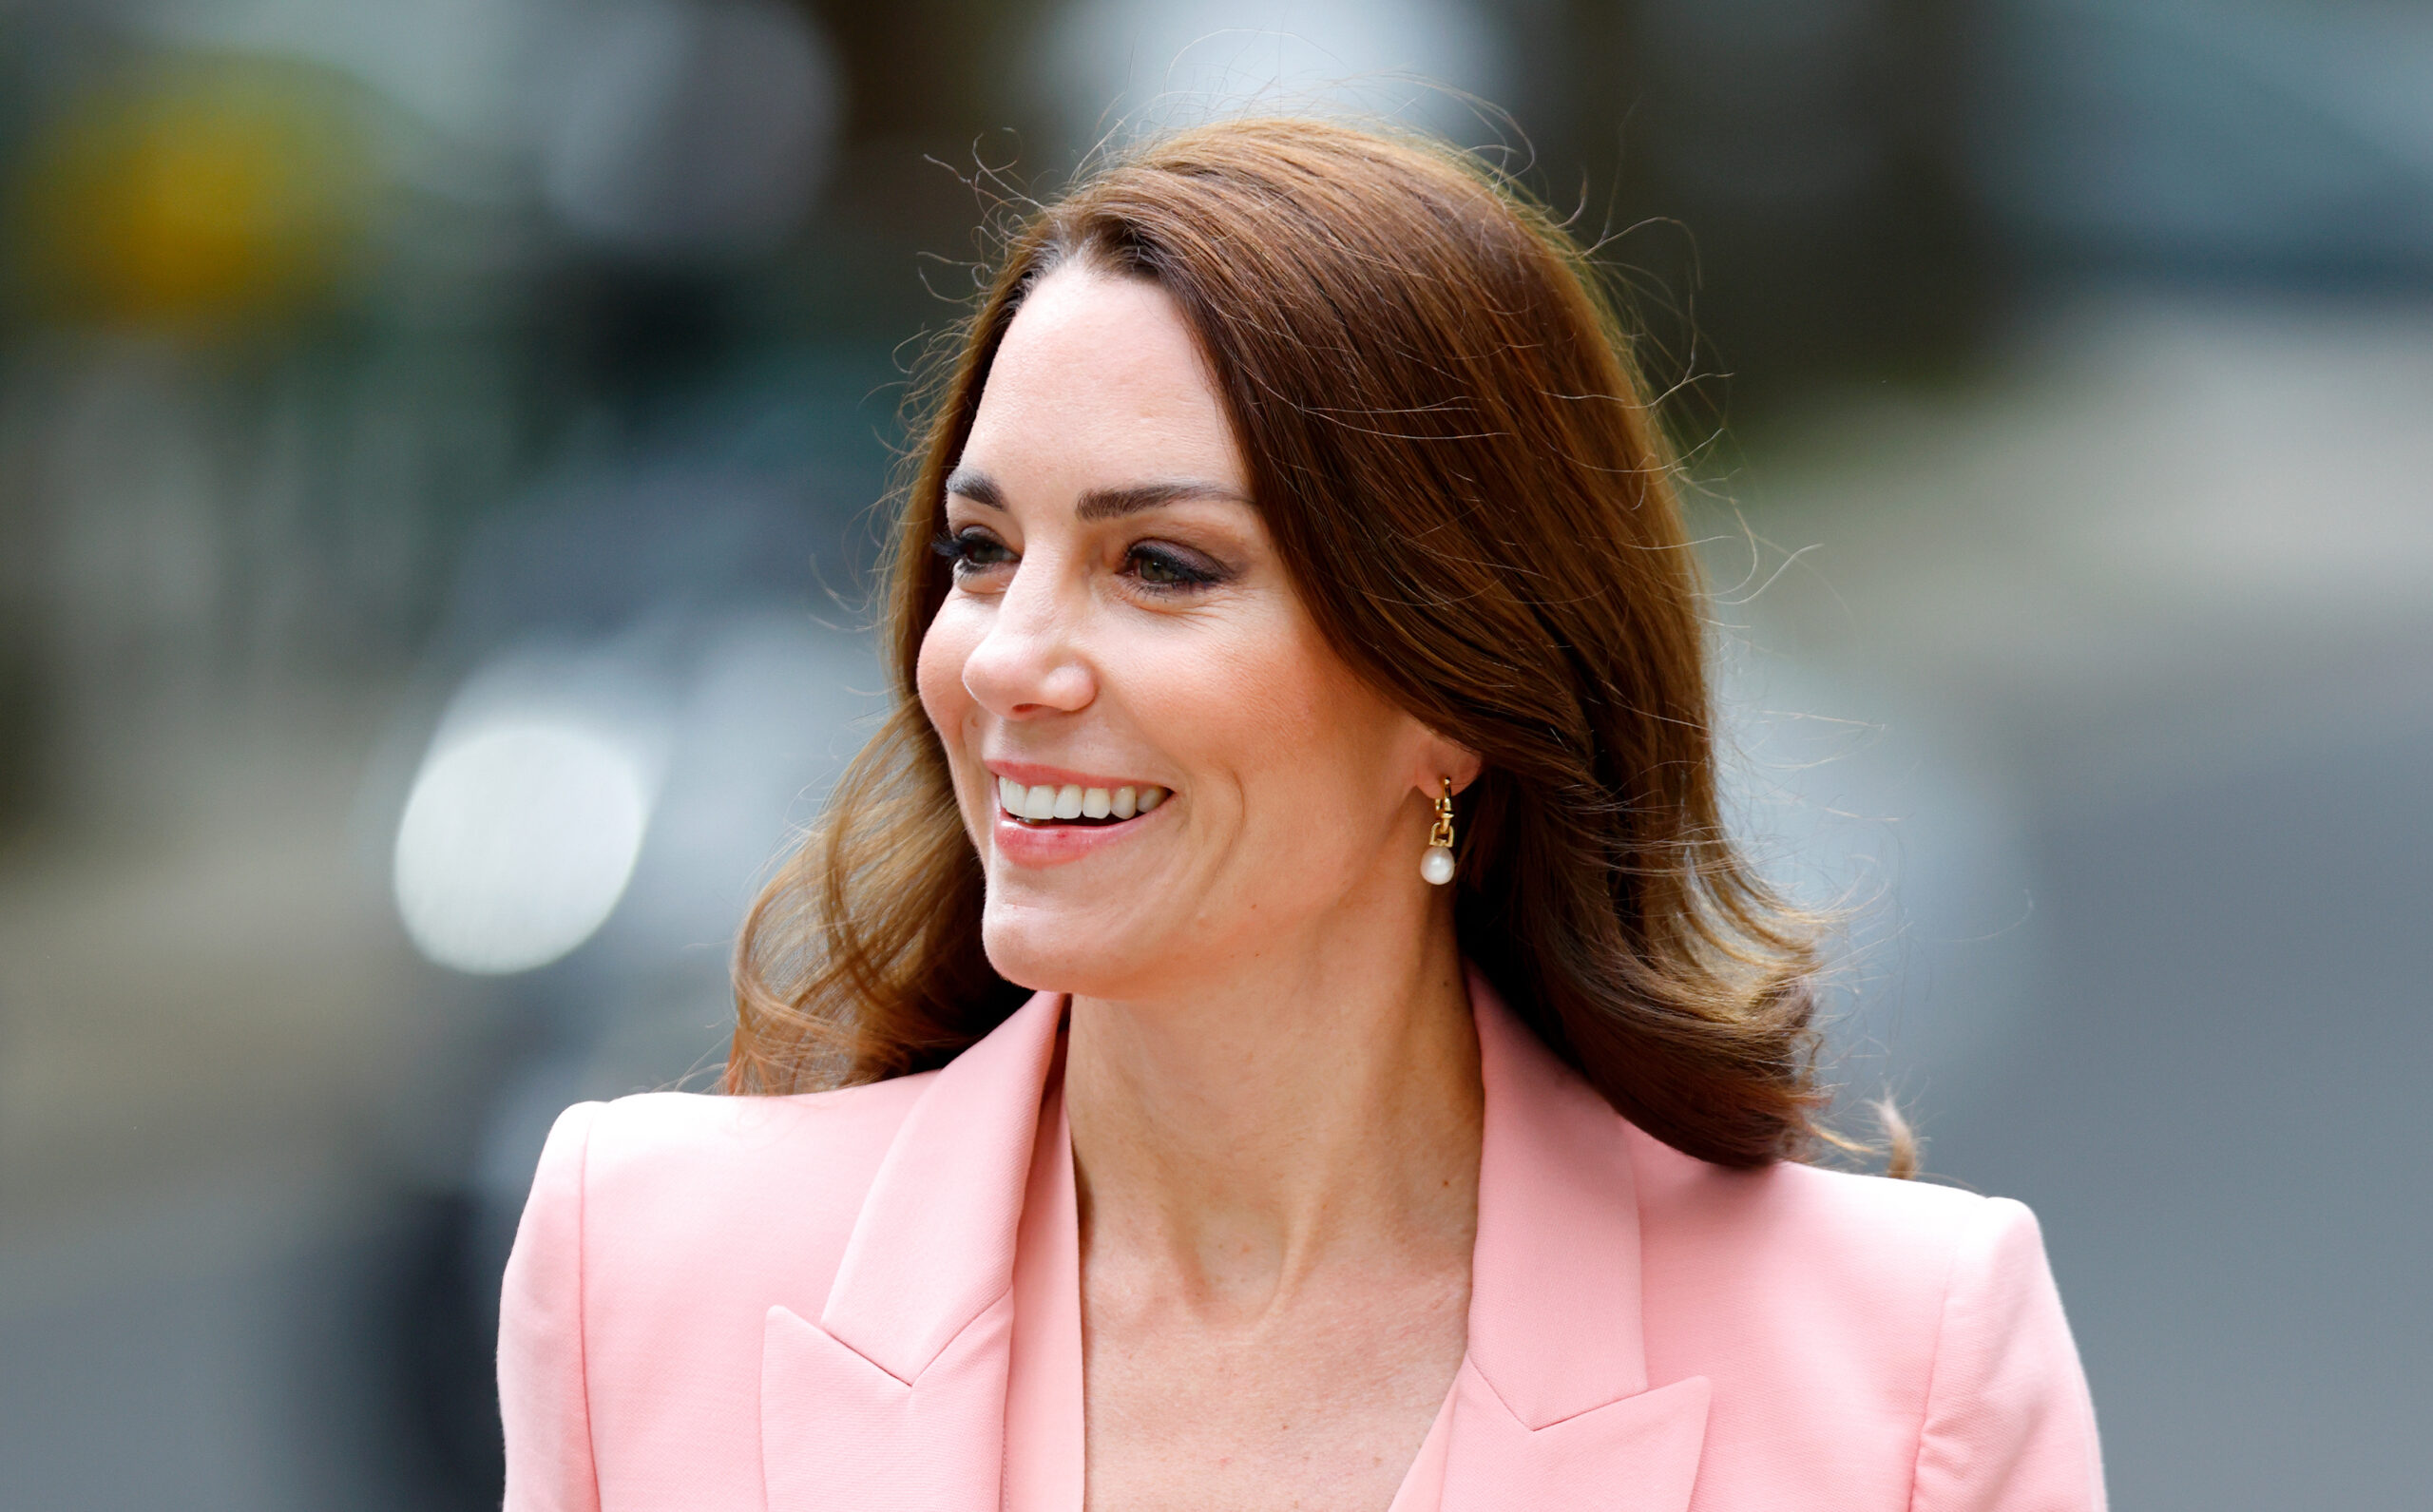 Prince William Shares Update About Kate Middleton Amid Her Cancer Battle